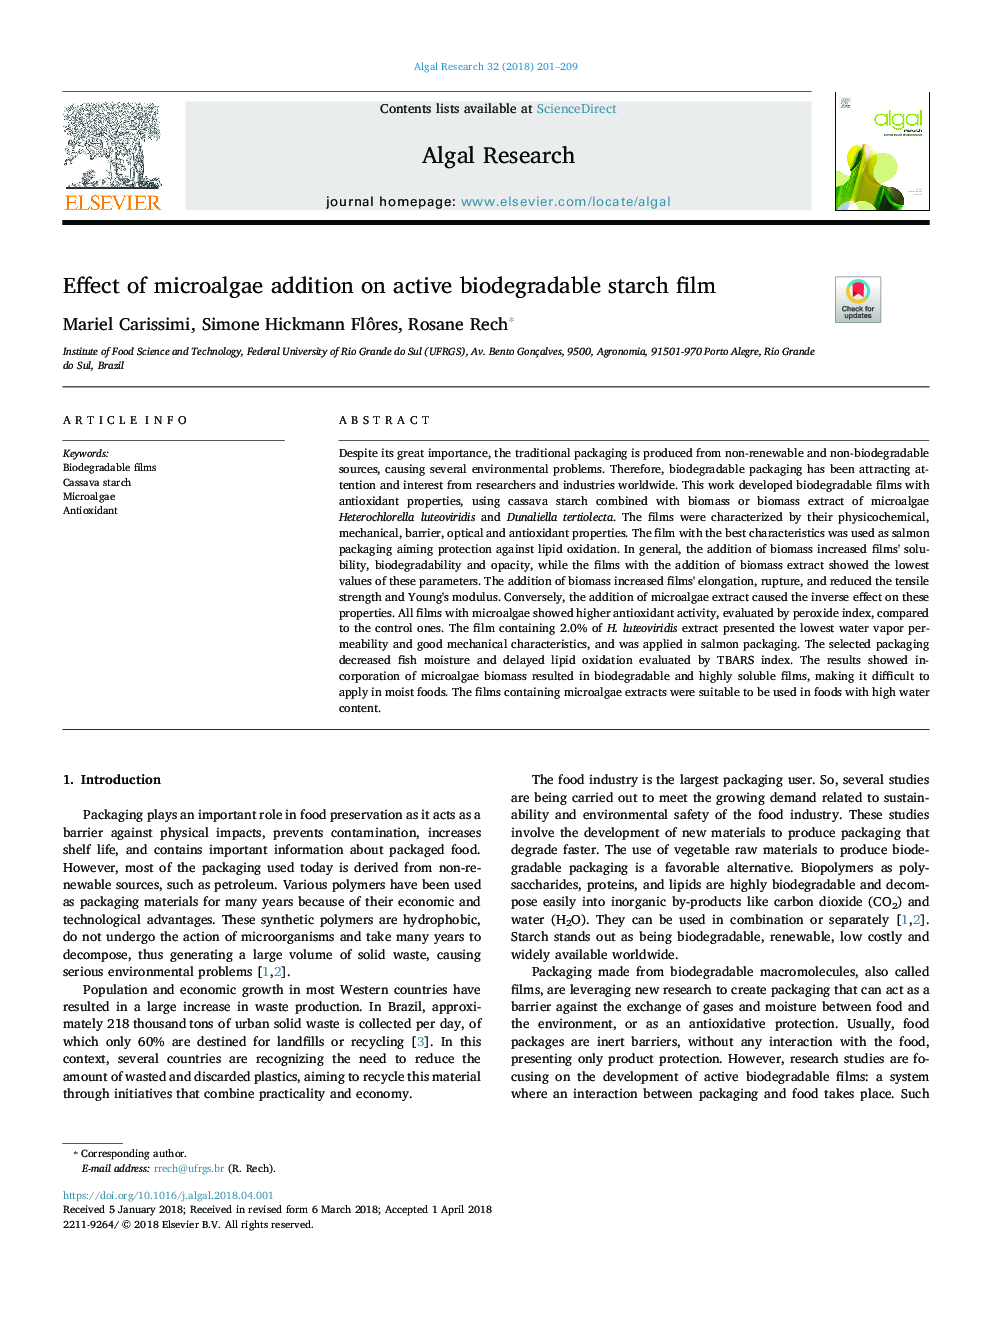 Effect of microalgae addition on active biodegradable starch film